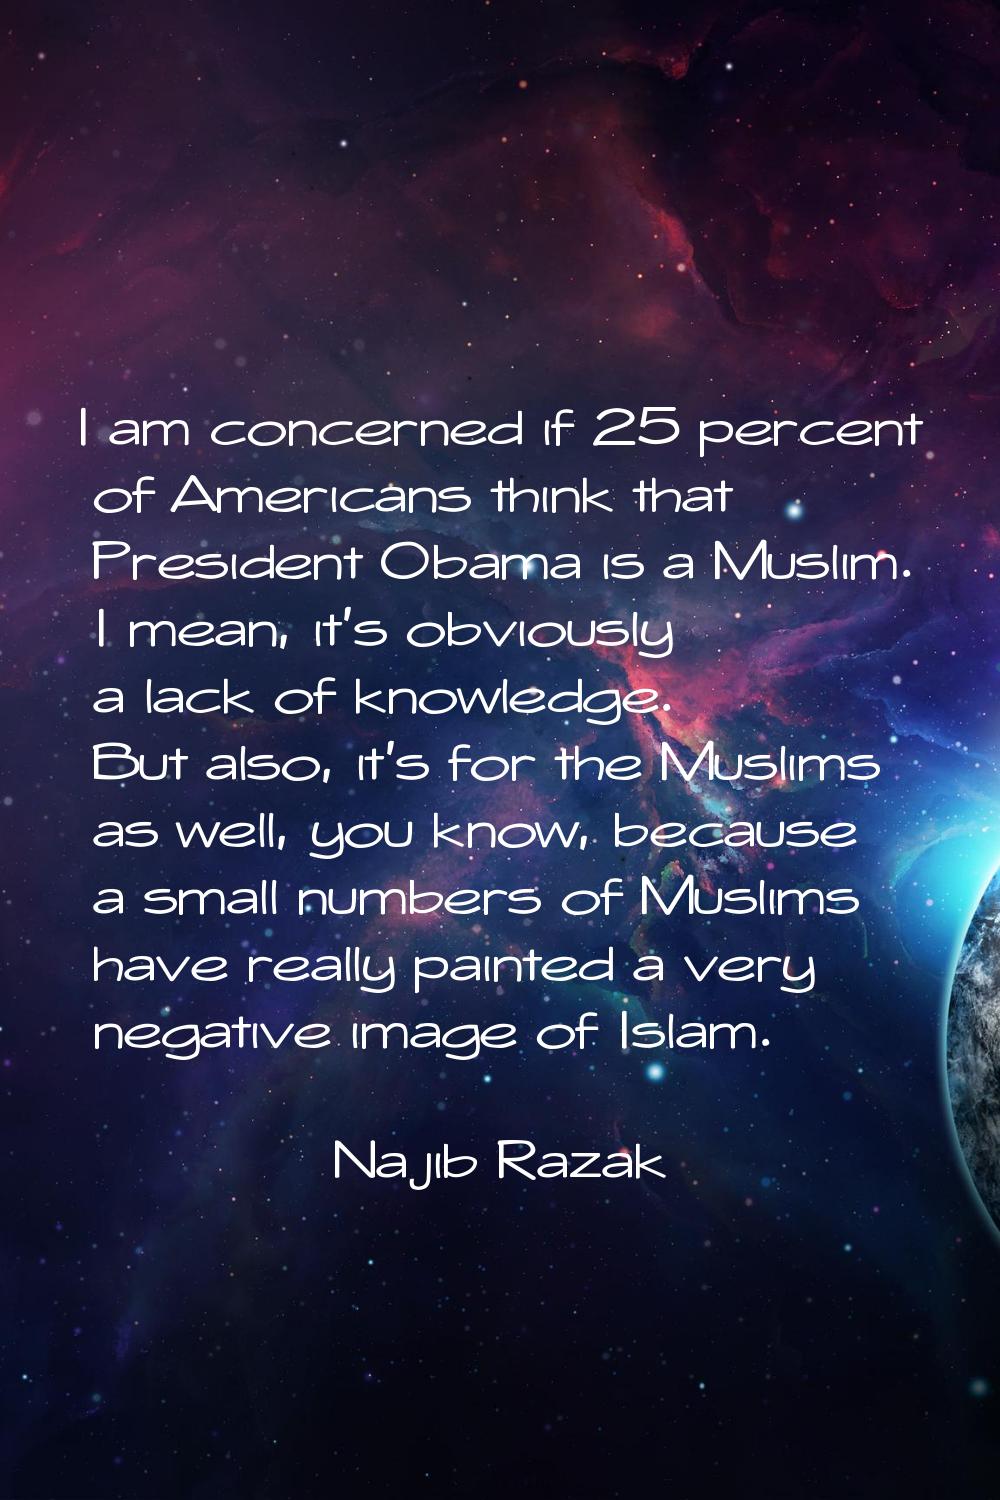 I am concerned if 25 percent of Americans think that President Obama is a Muslim. I mean, it's obvi